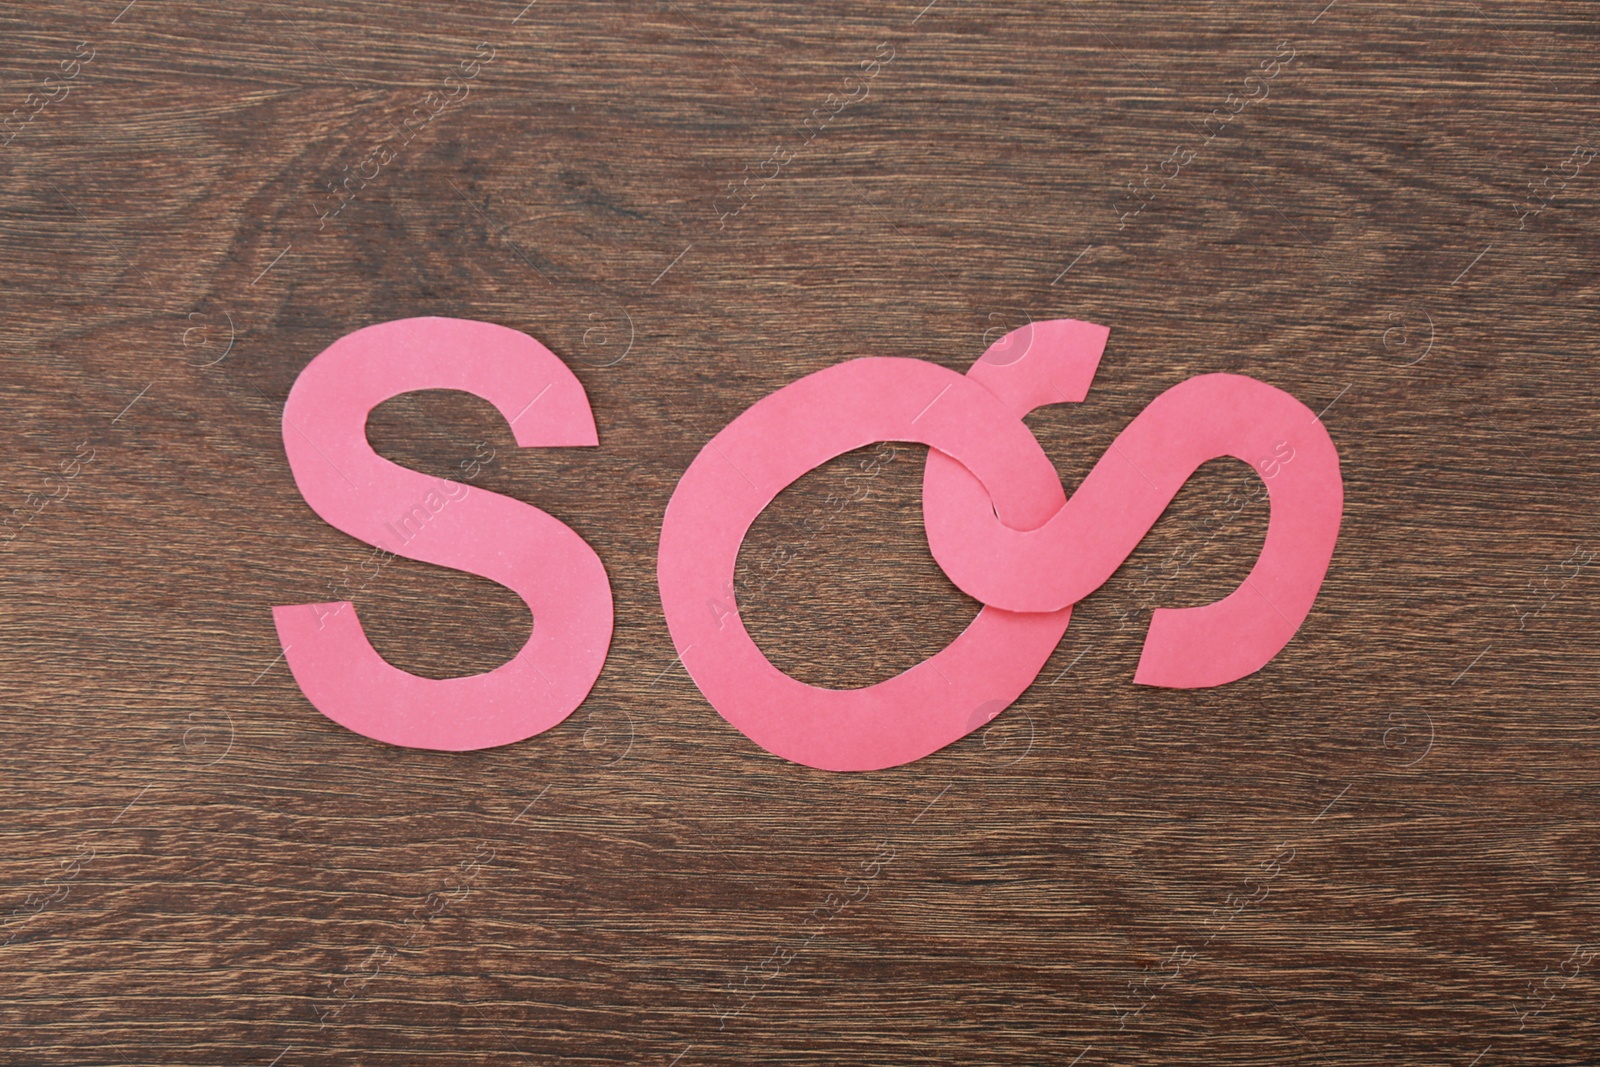 Photo of Abbreviation SOS made of paper letters on wooden background, top view